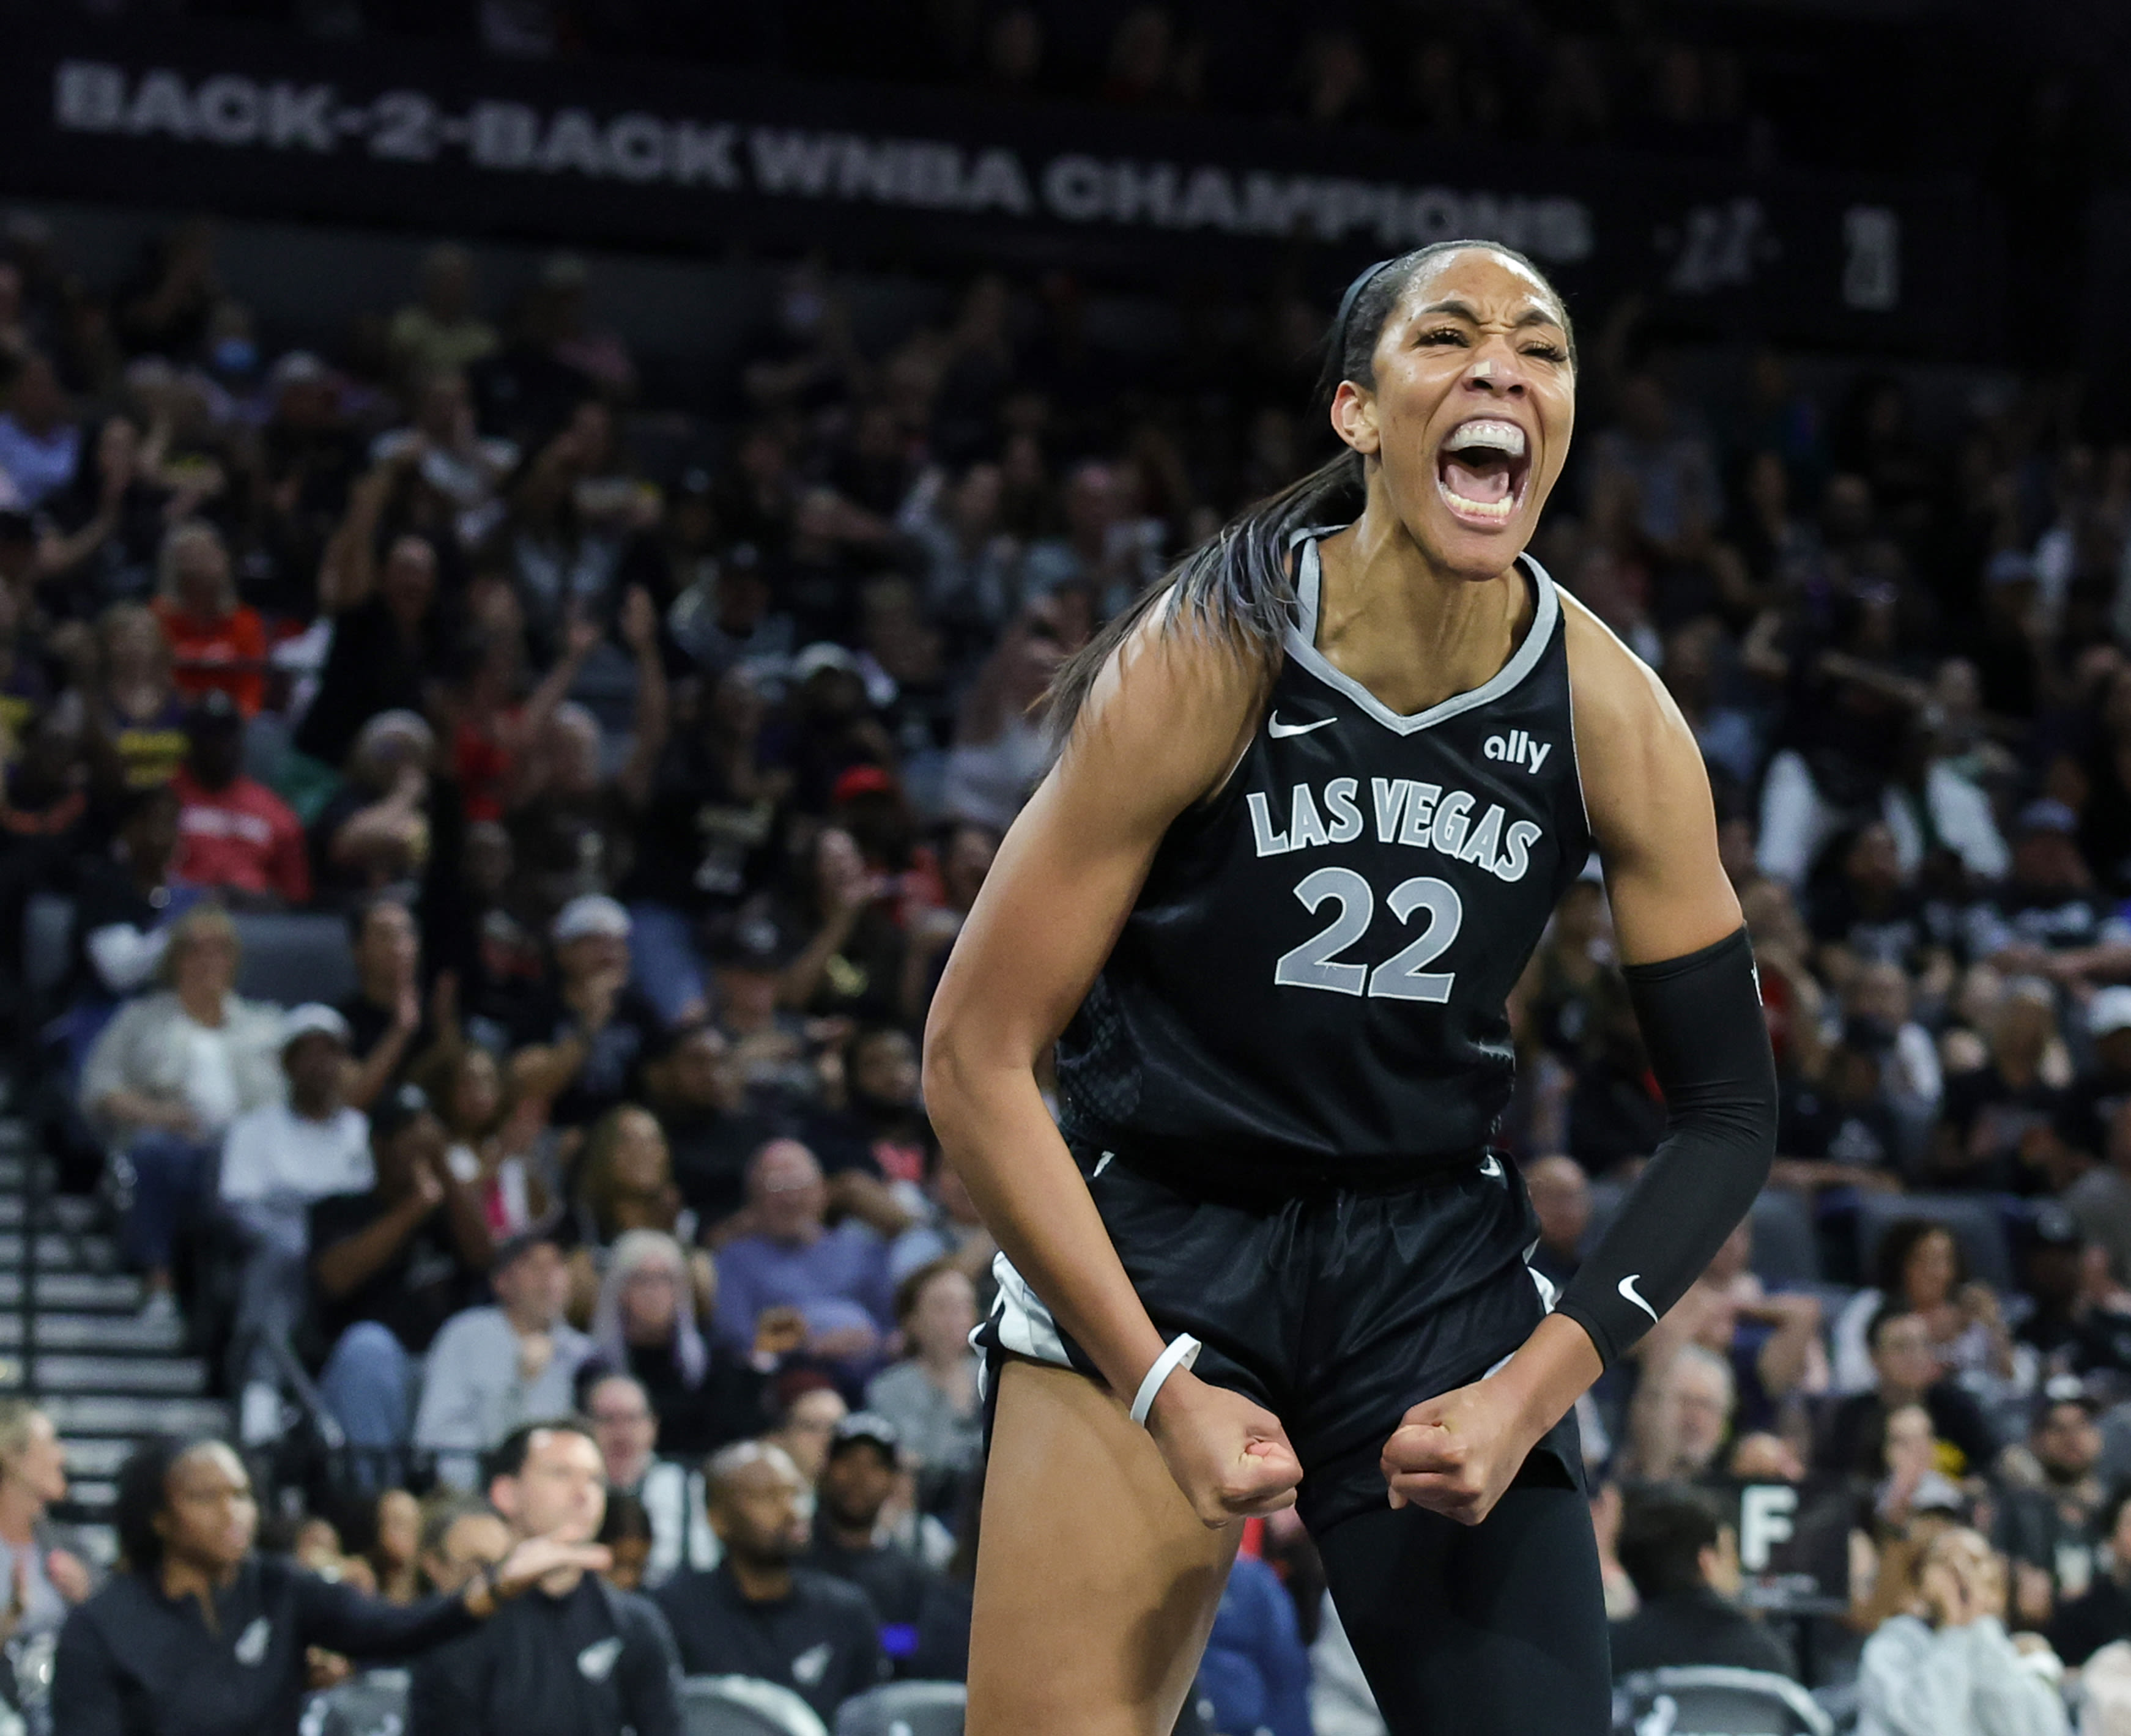 A’ja Wilson makes WNBA history, early MVP claim while leading Aces past Wings